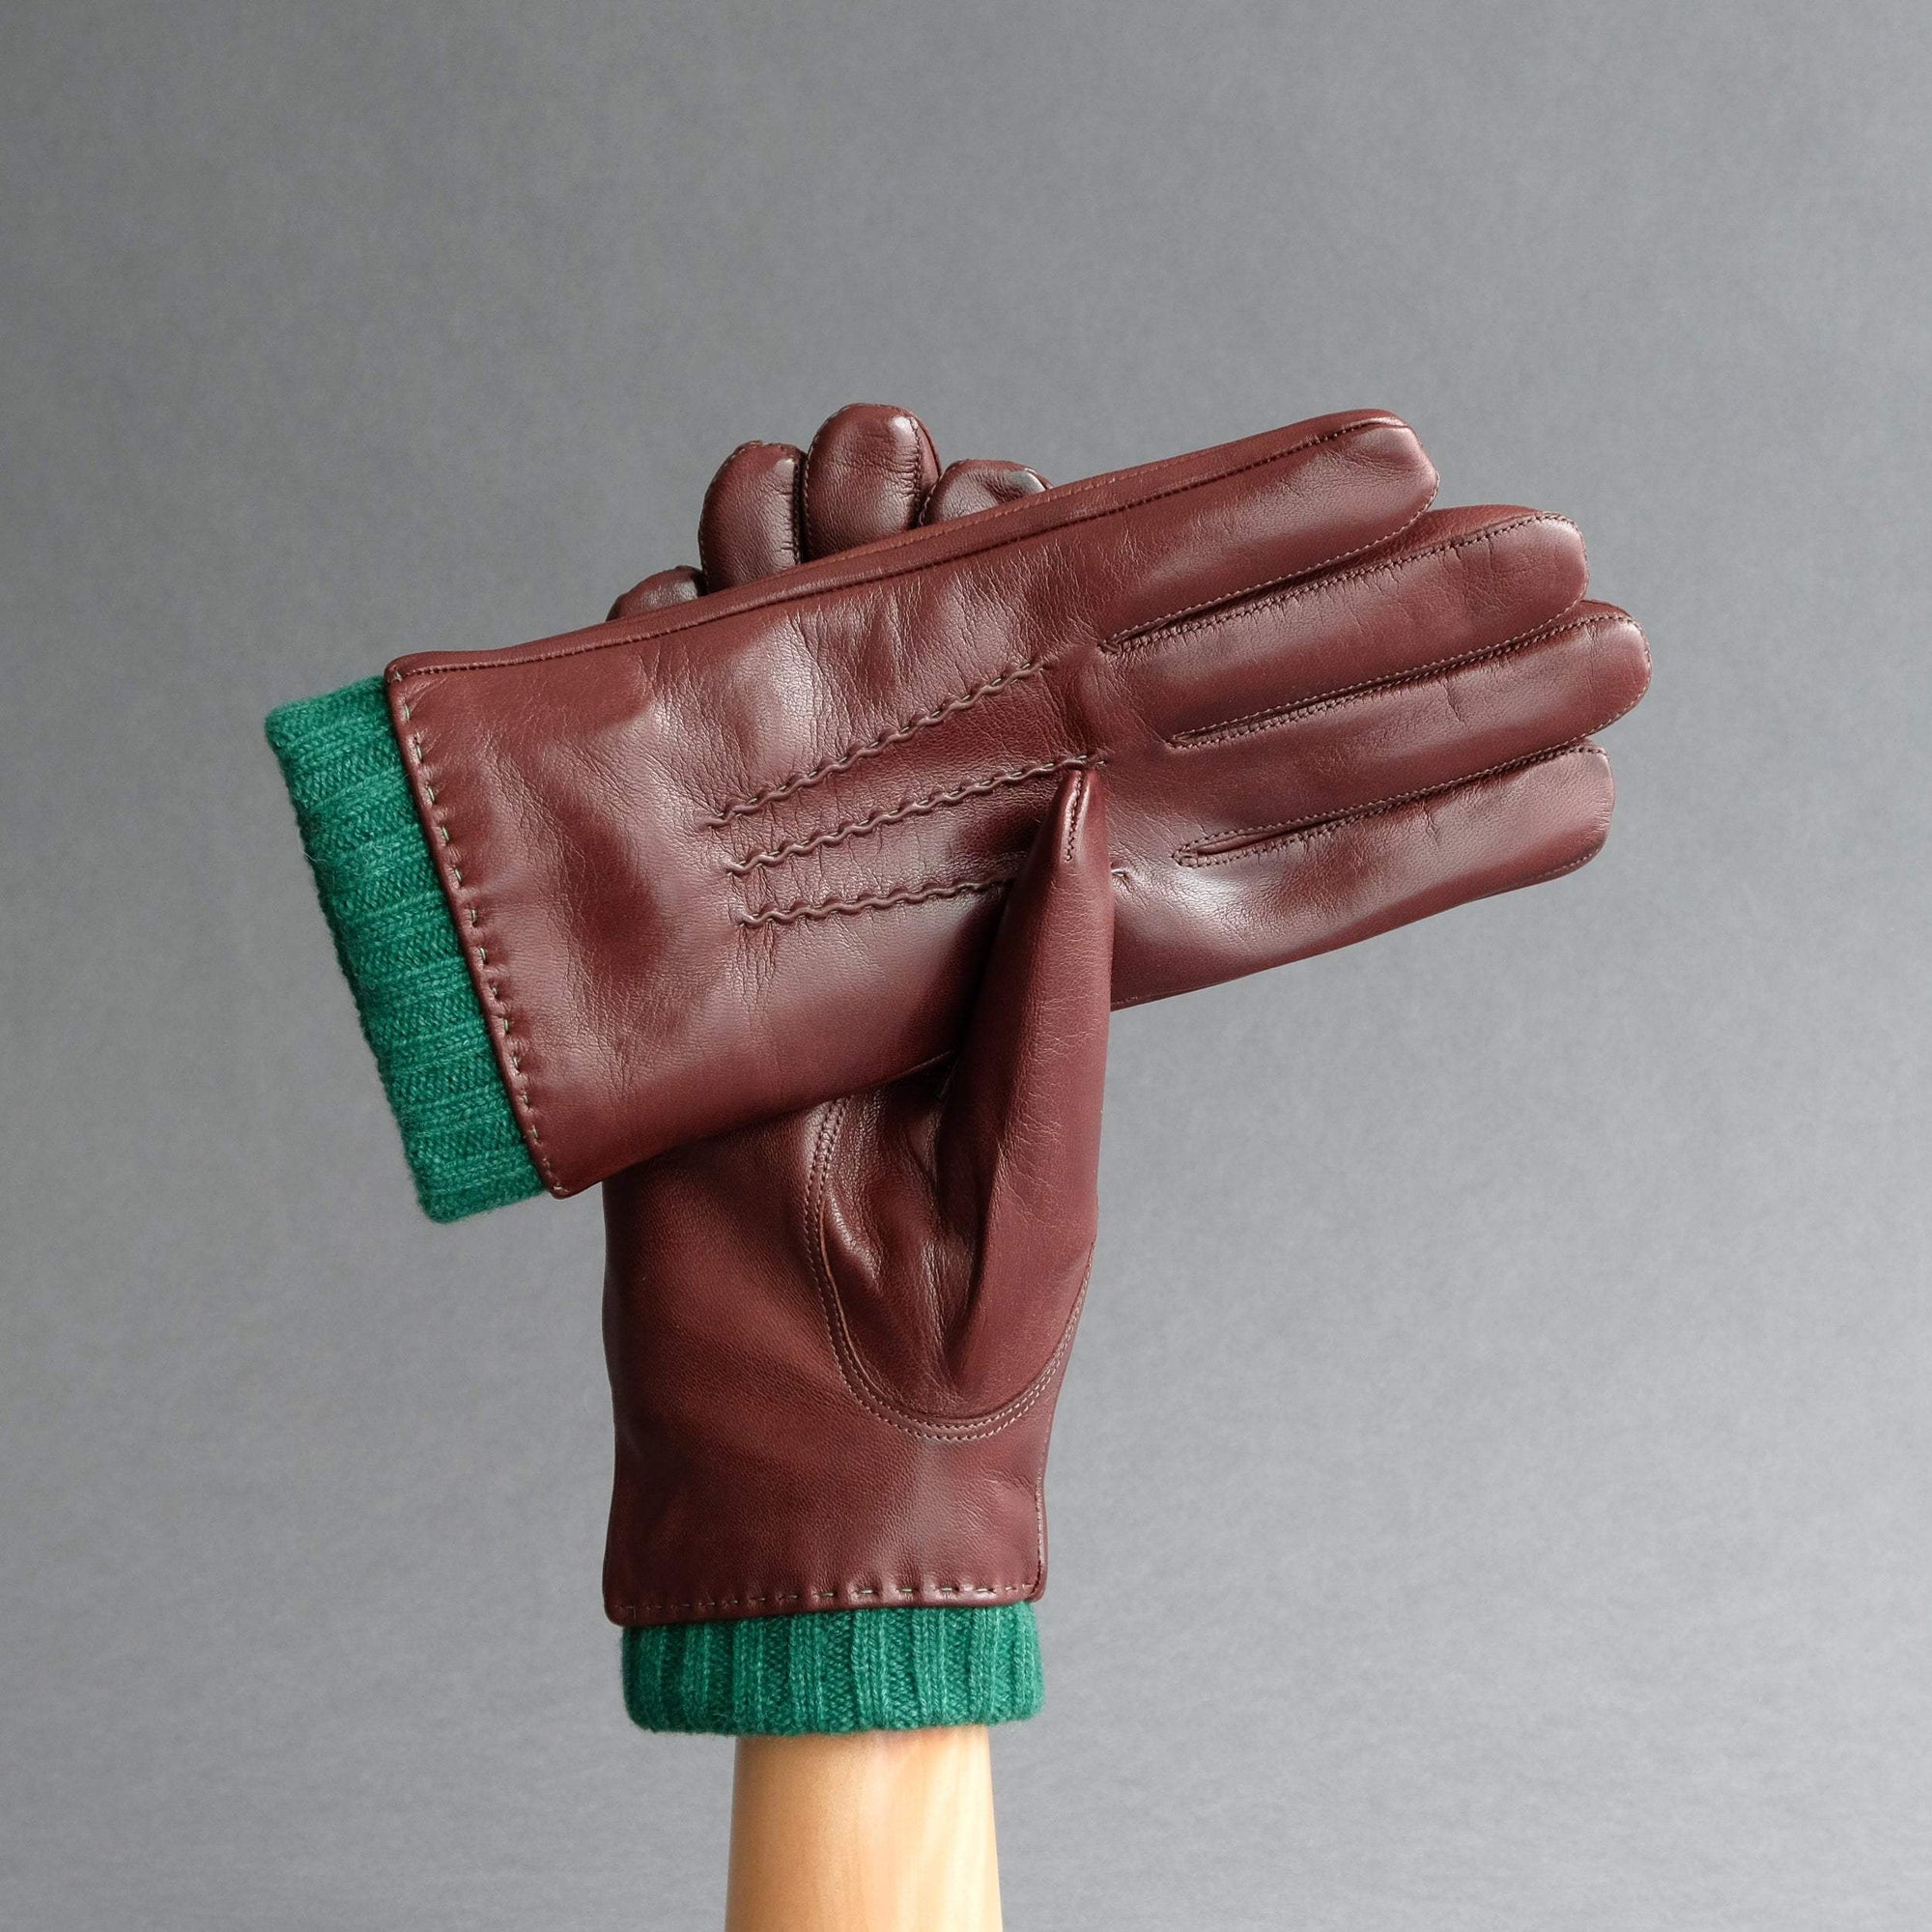 Gentlemen's Gloves from Brown/Tan Hair Sheep Nappa Lined With Cashmere - TR Handschuhe Wien - Thomas Riemer Handmade Gloves